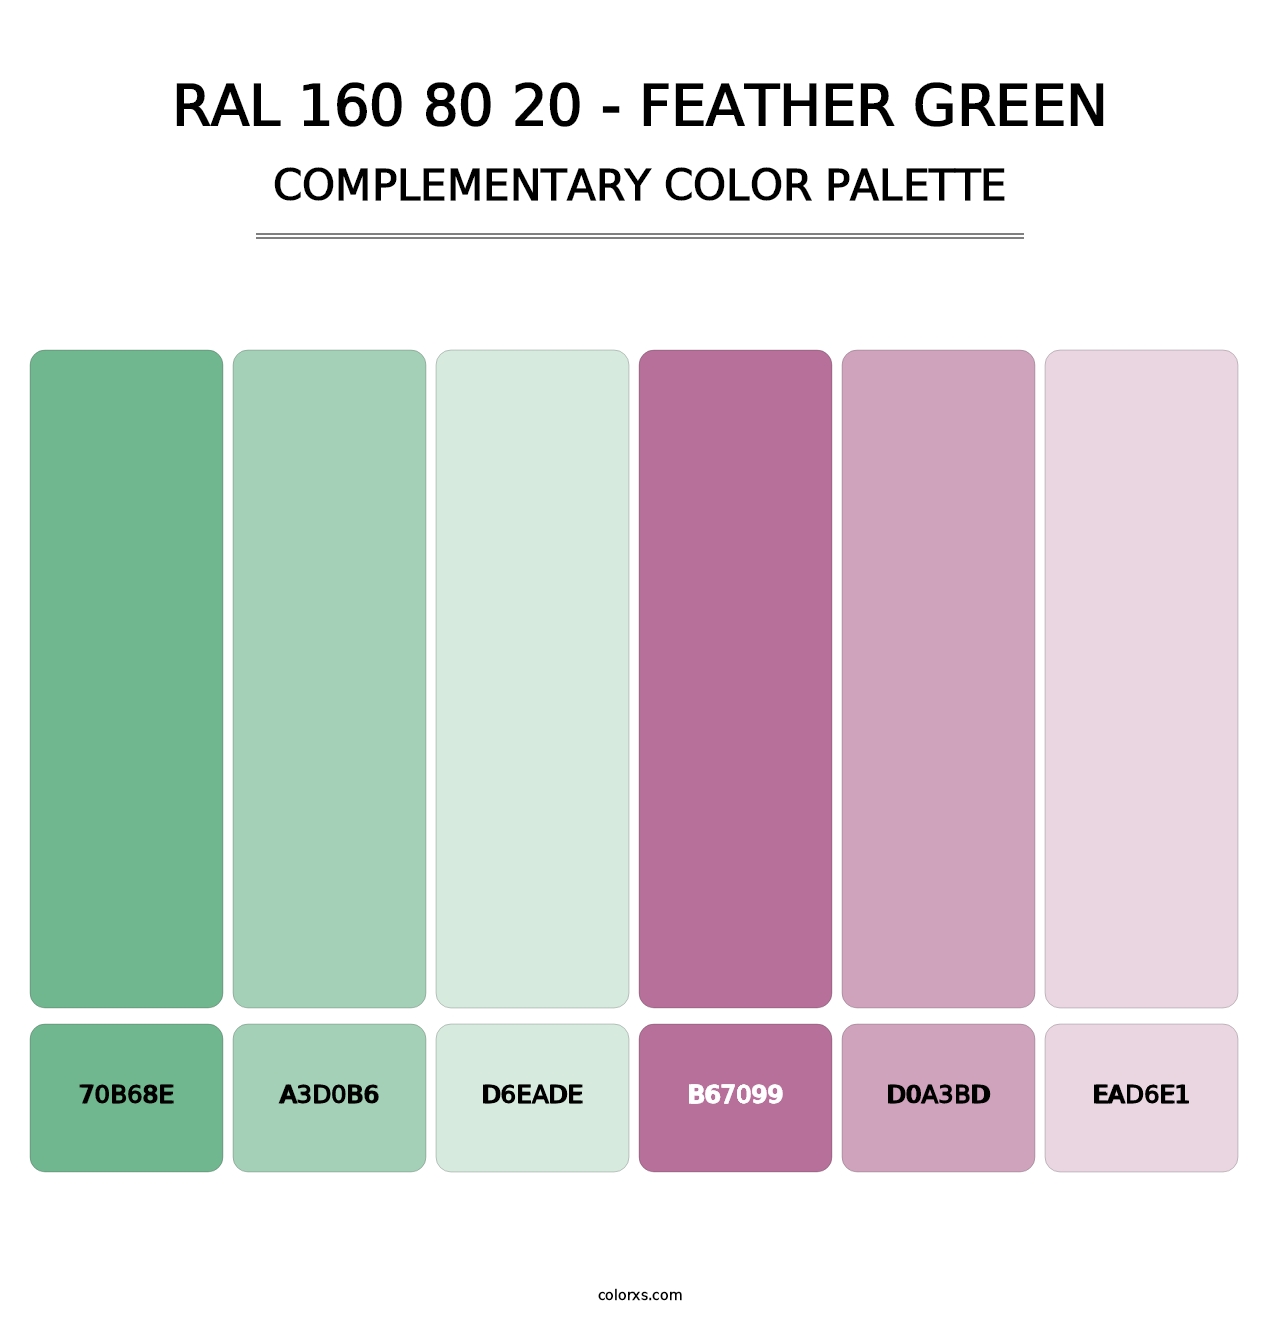 RAL 160 80 20 - Feather Green - Complementary Color Palette